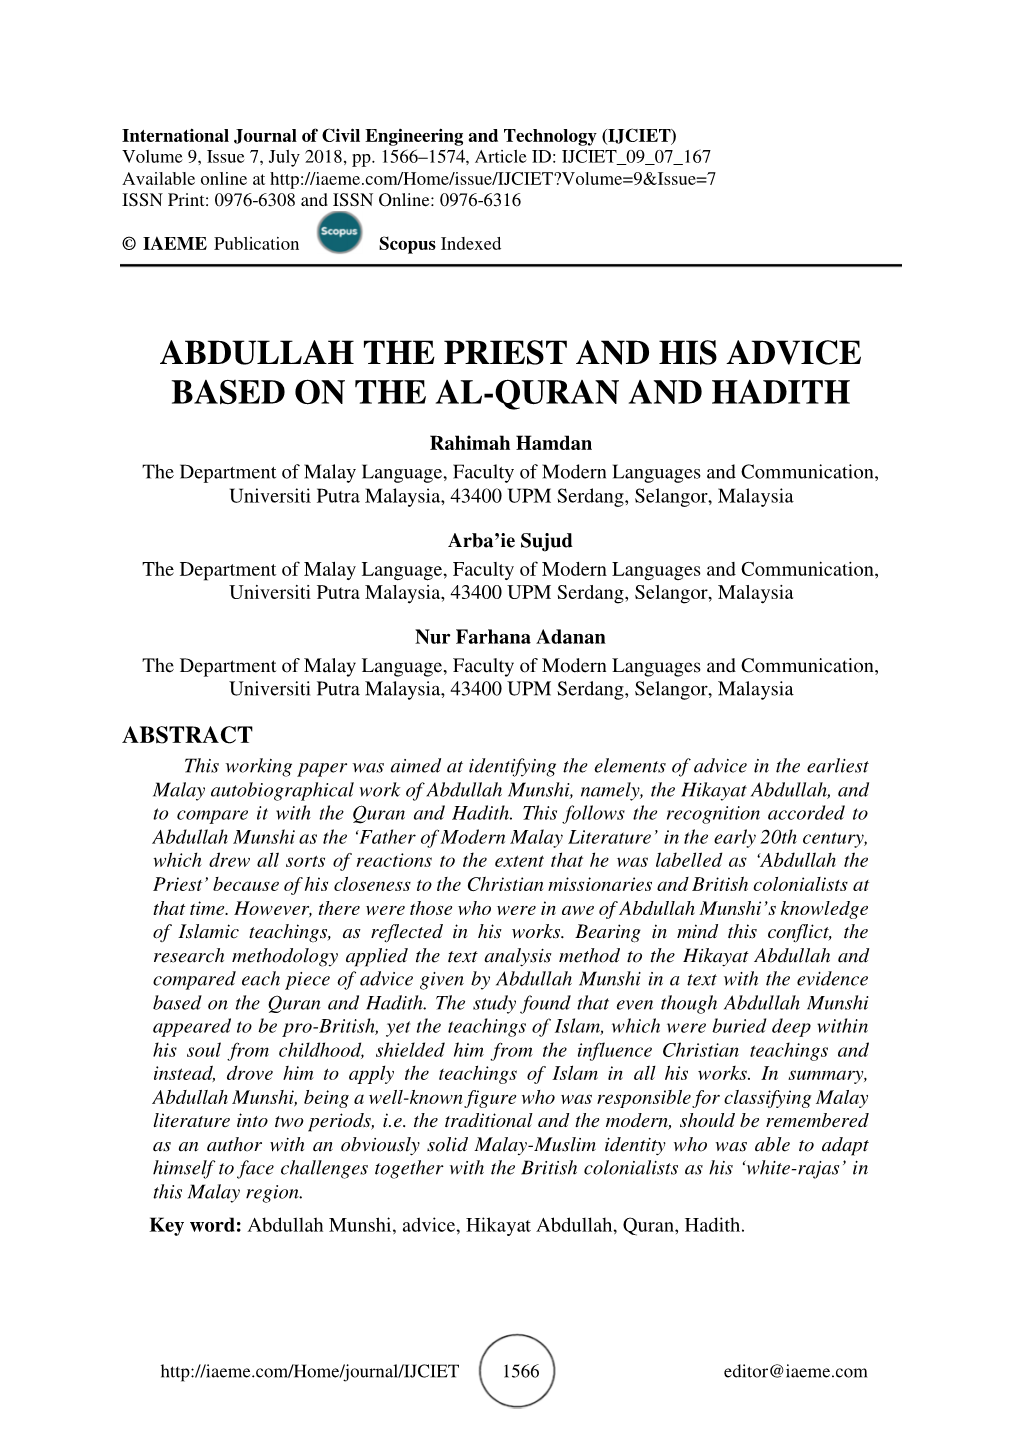 Abdullah the Priest and His Advice Based on the Al-Quran and Hadith